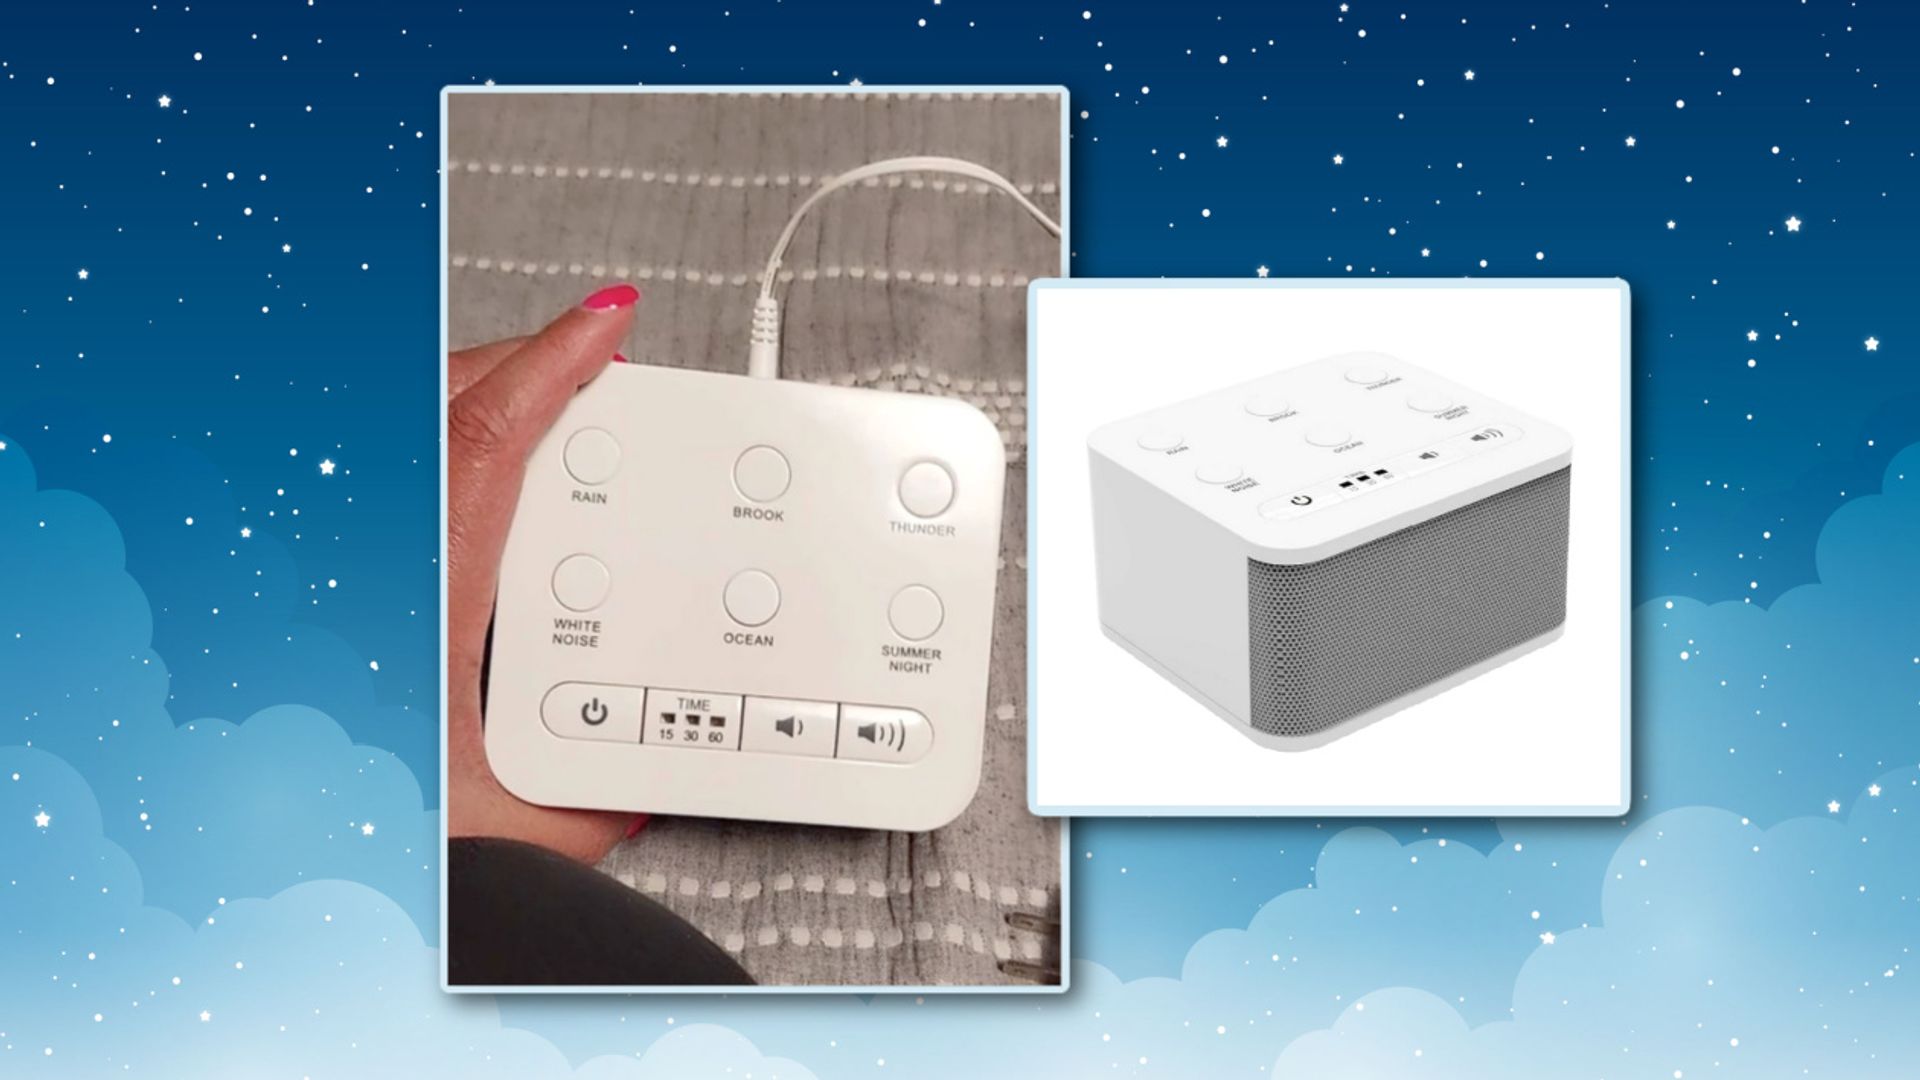 Amazon shoppers say this white noise machine 'works miracles' to help you sleep so I had to try it